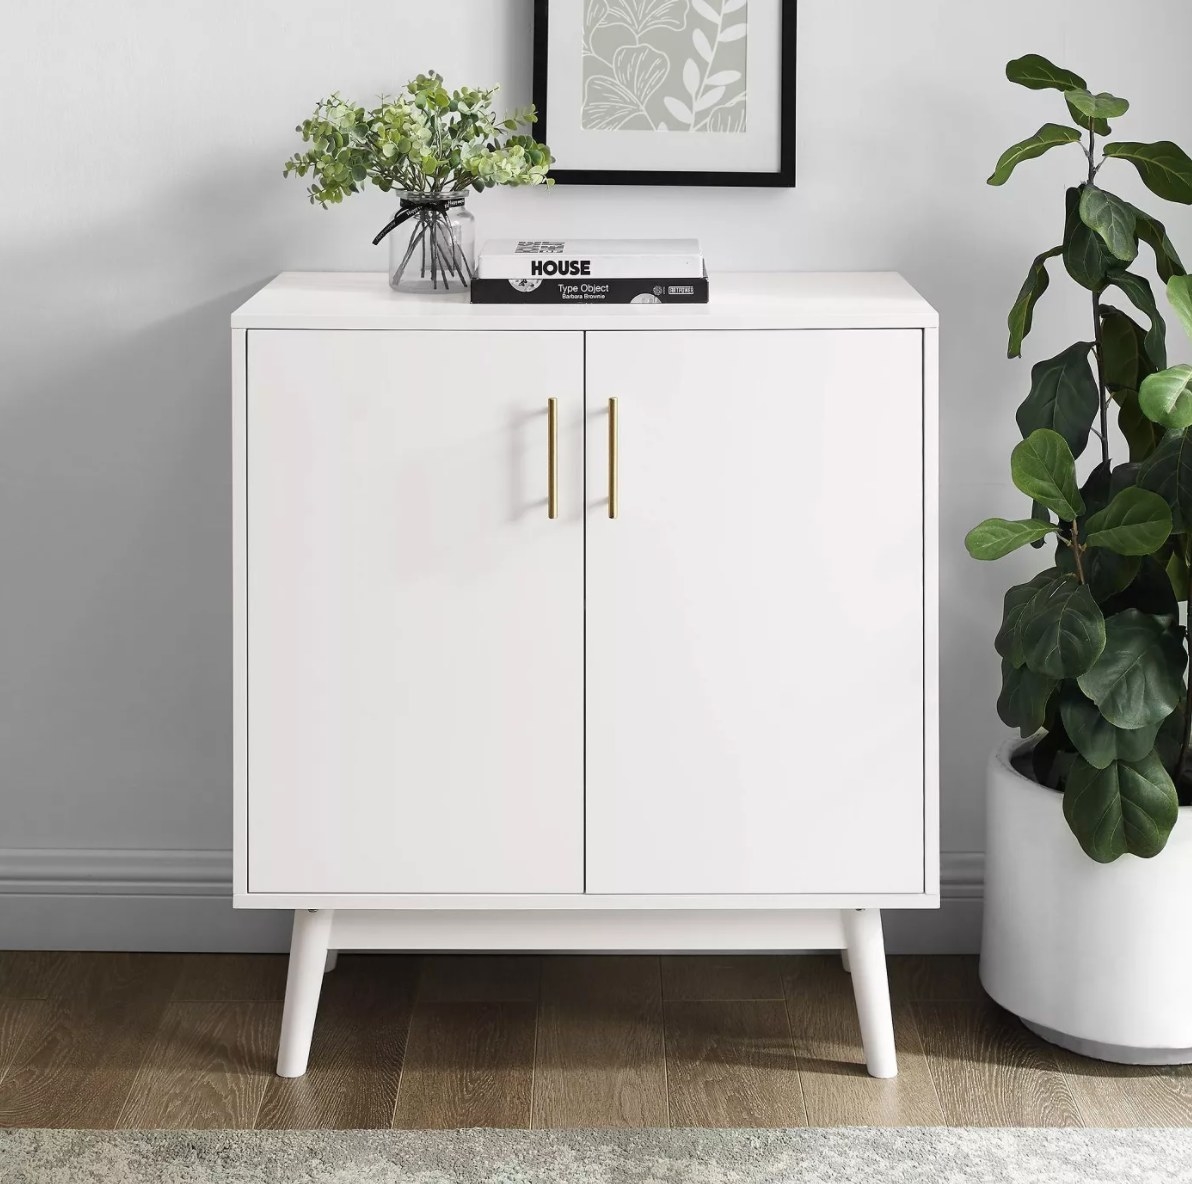 The midcentury modern accent cabinet in white